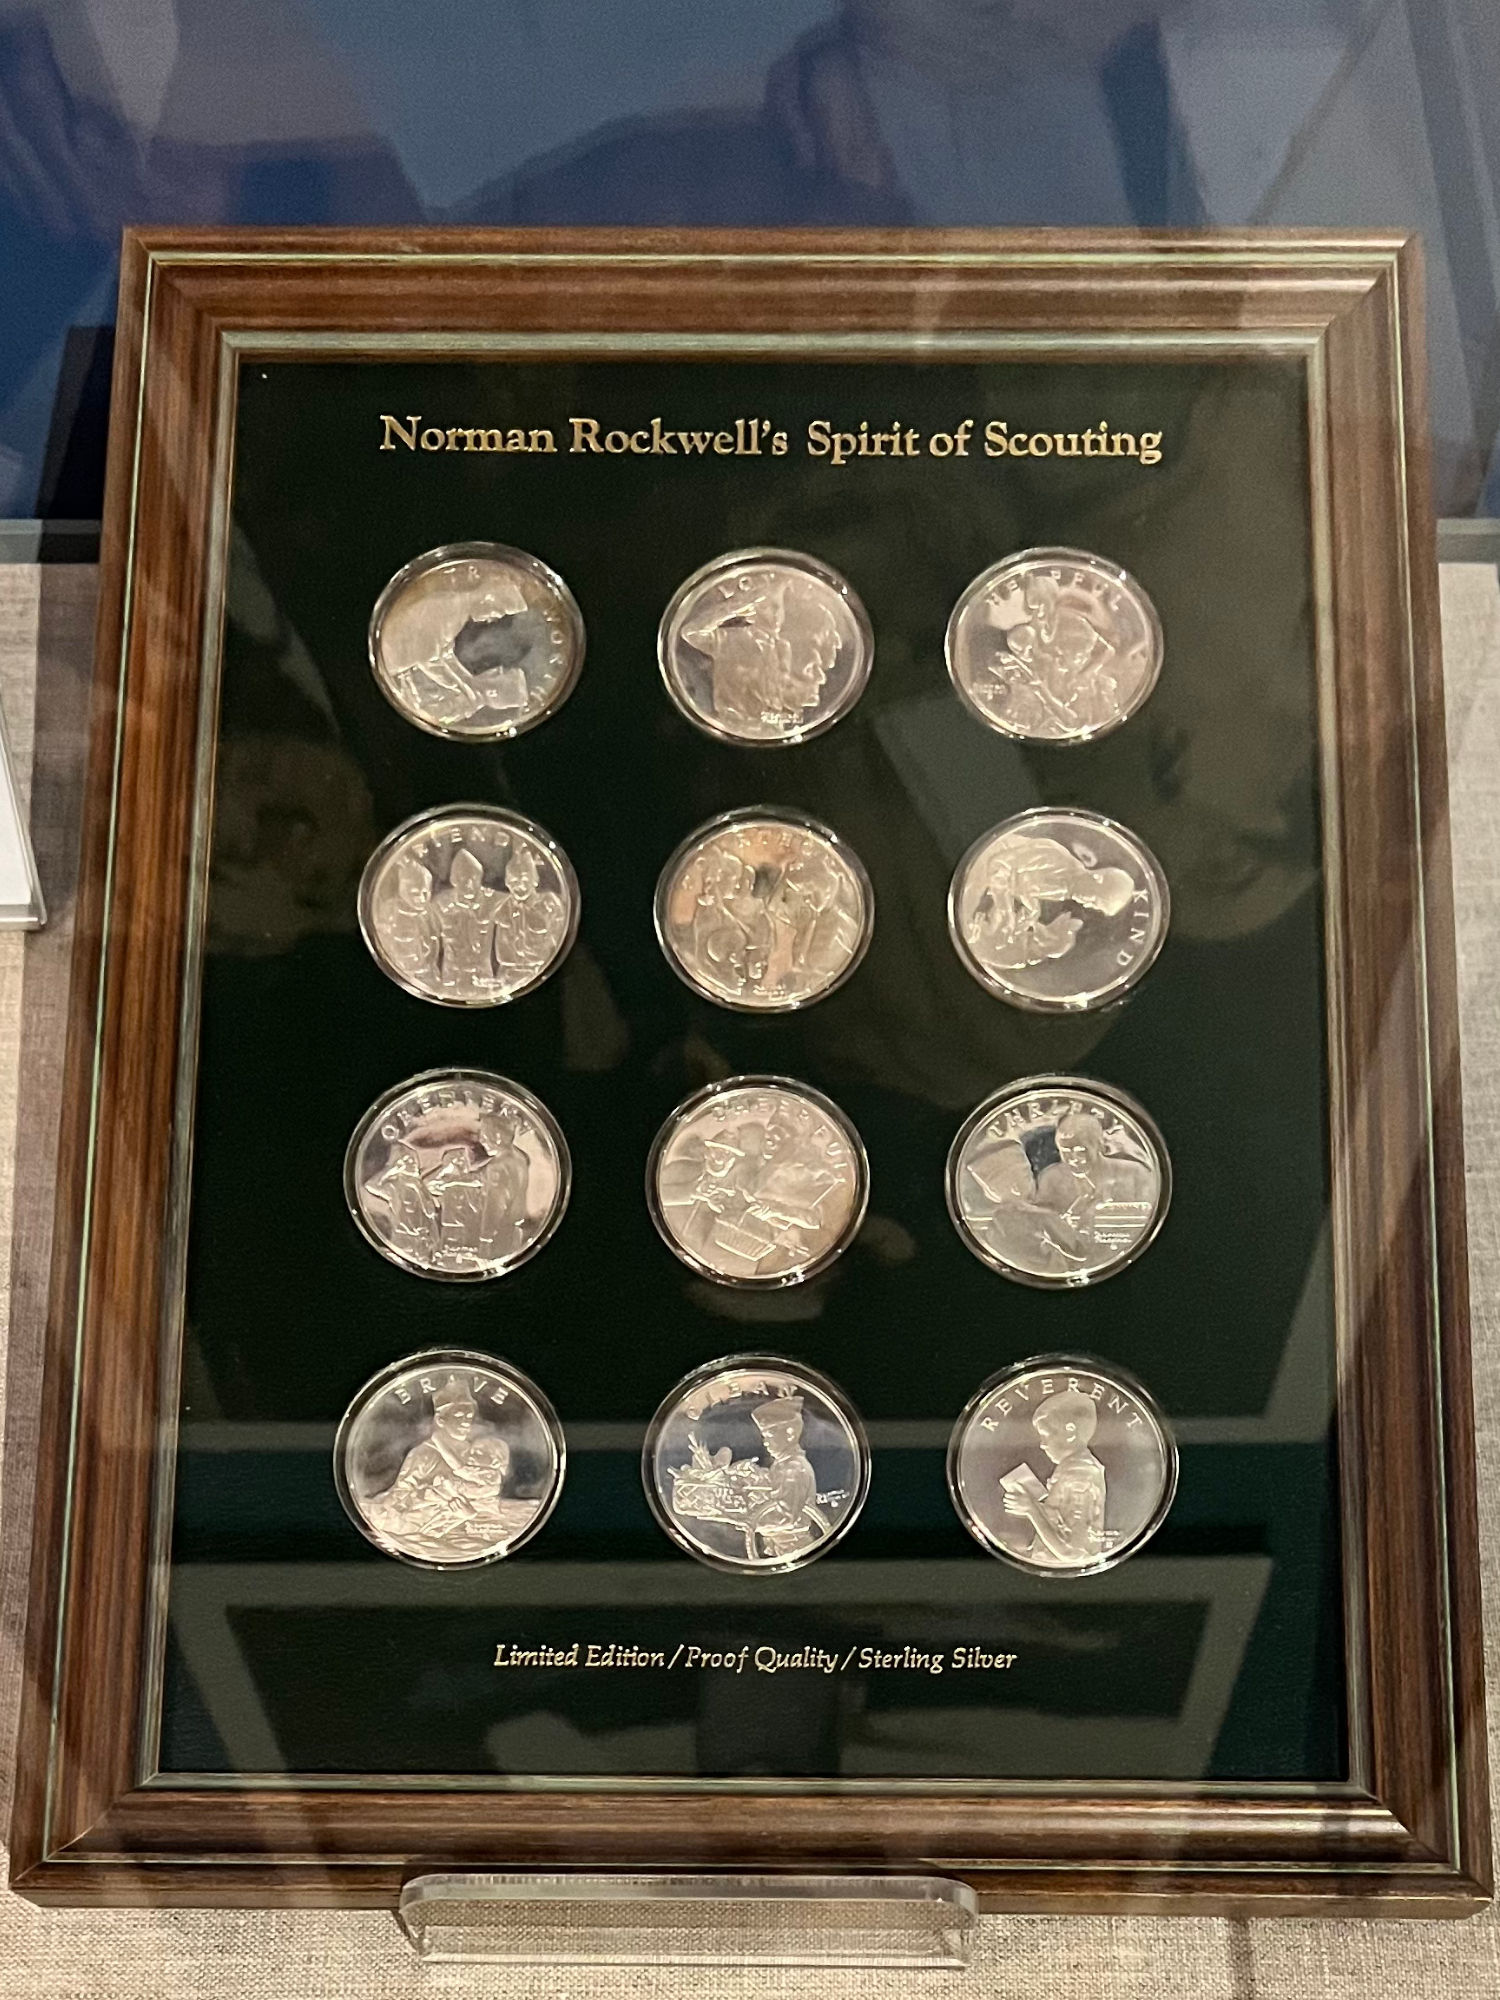 Norman Rockwell Scouting Medals